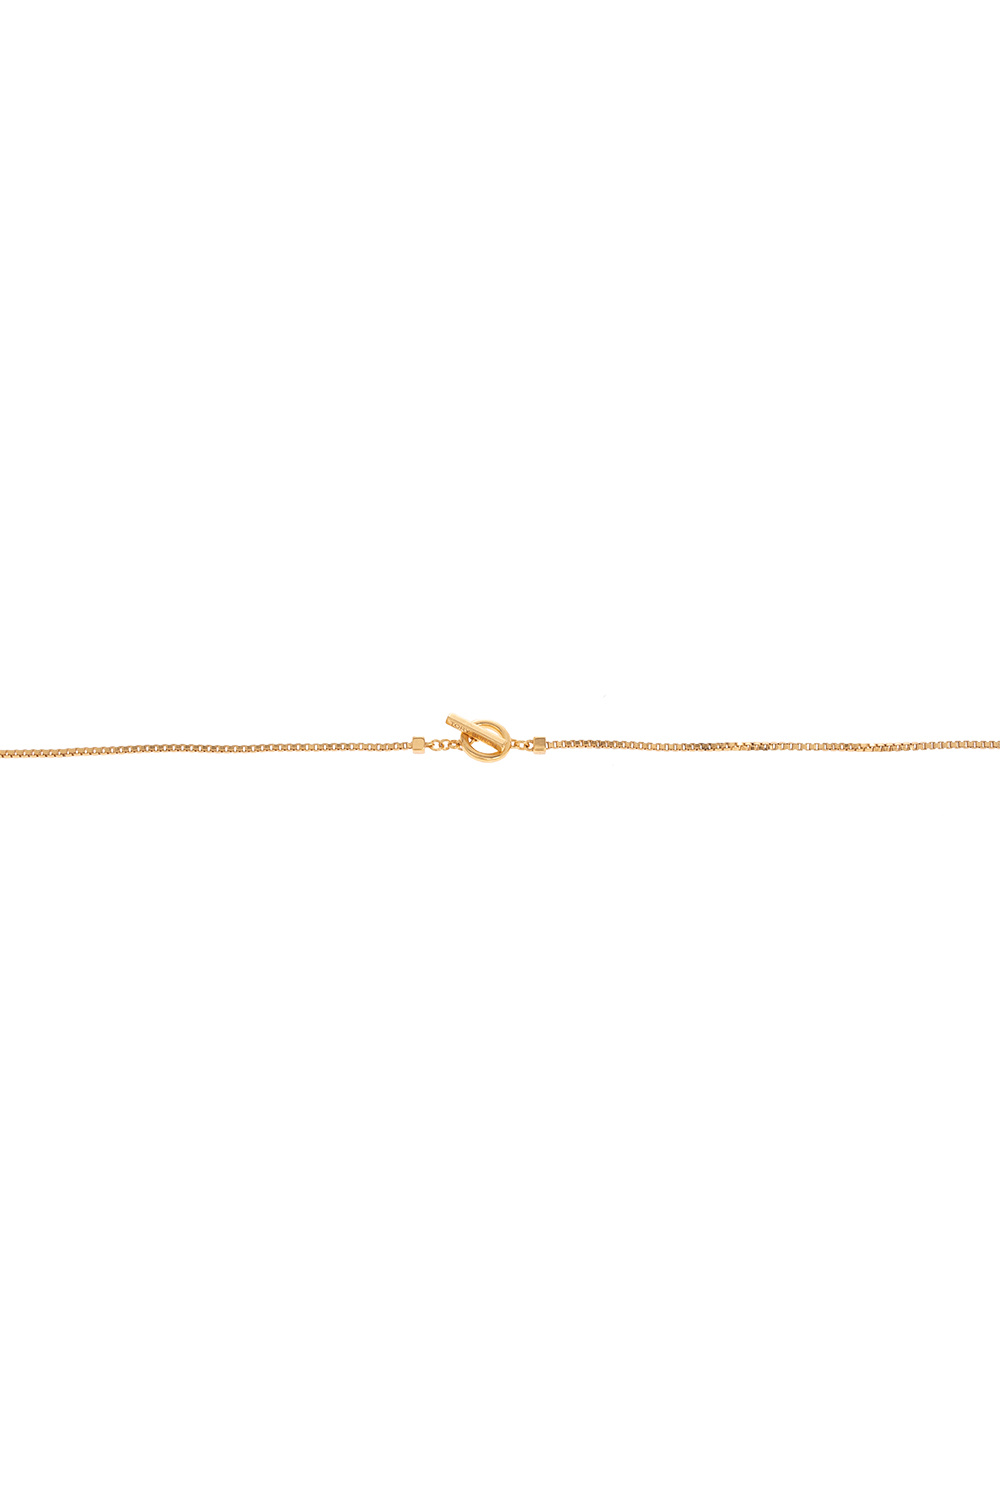 Tory Burch Charm necklace